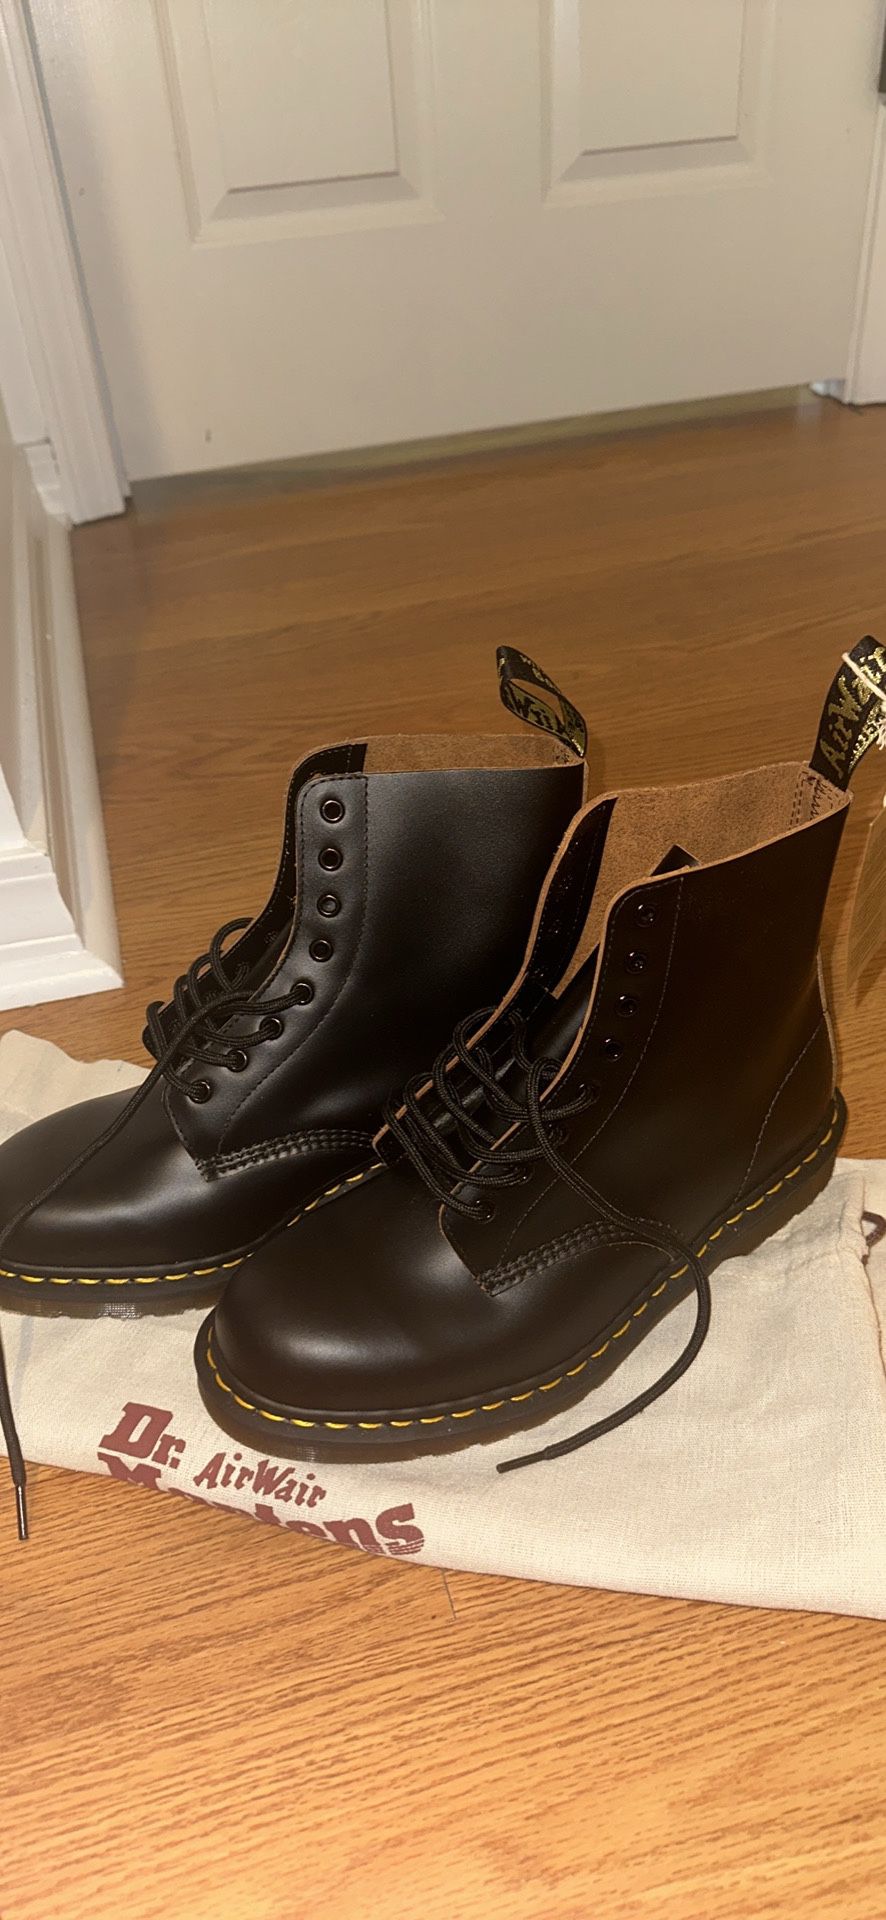 Dr Martens 1460 Vintage Boots made in England new size 11